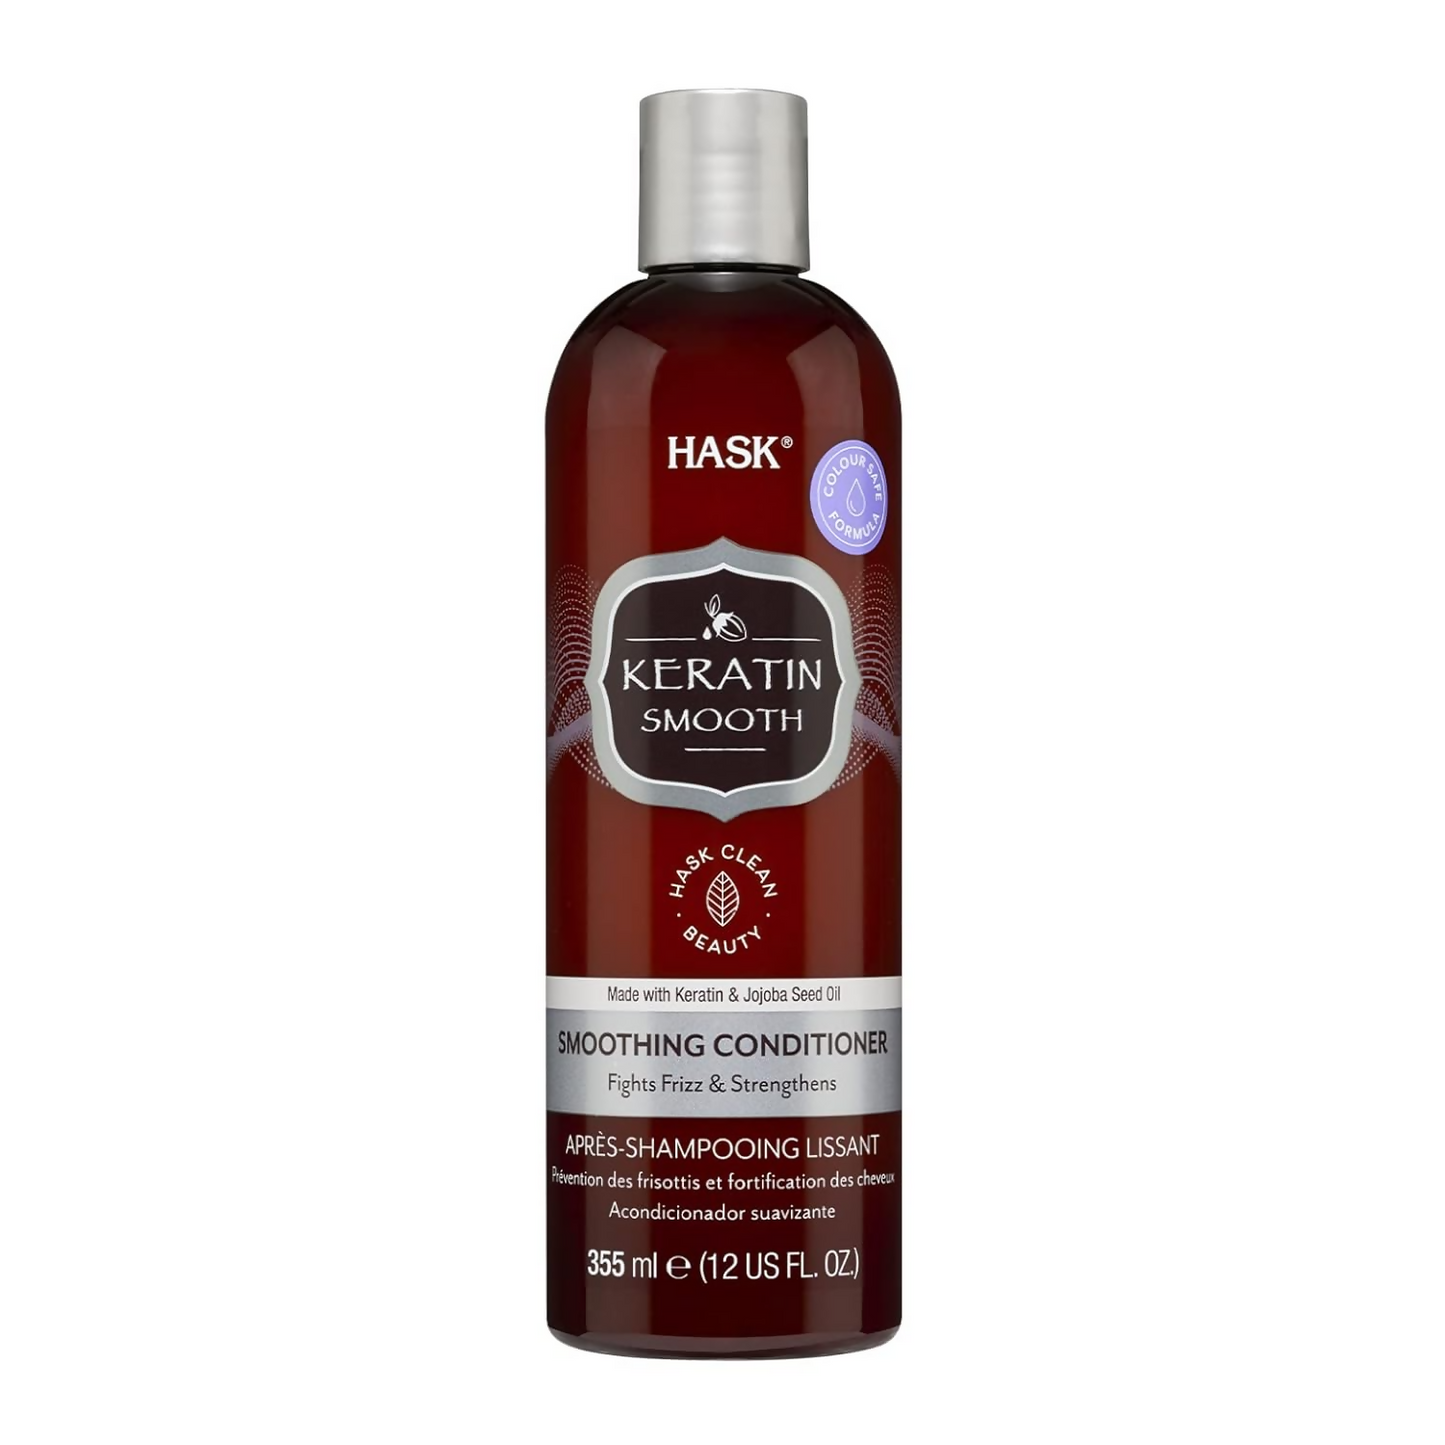 HASK Keratin Smoothing Conditioner